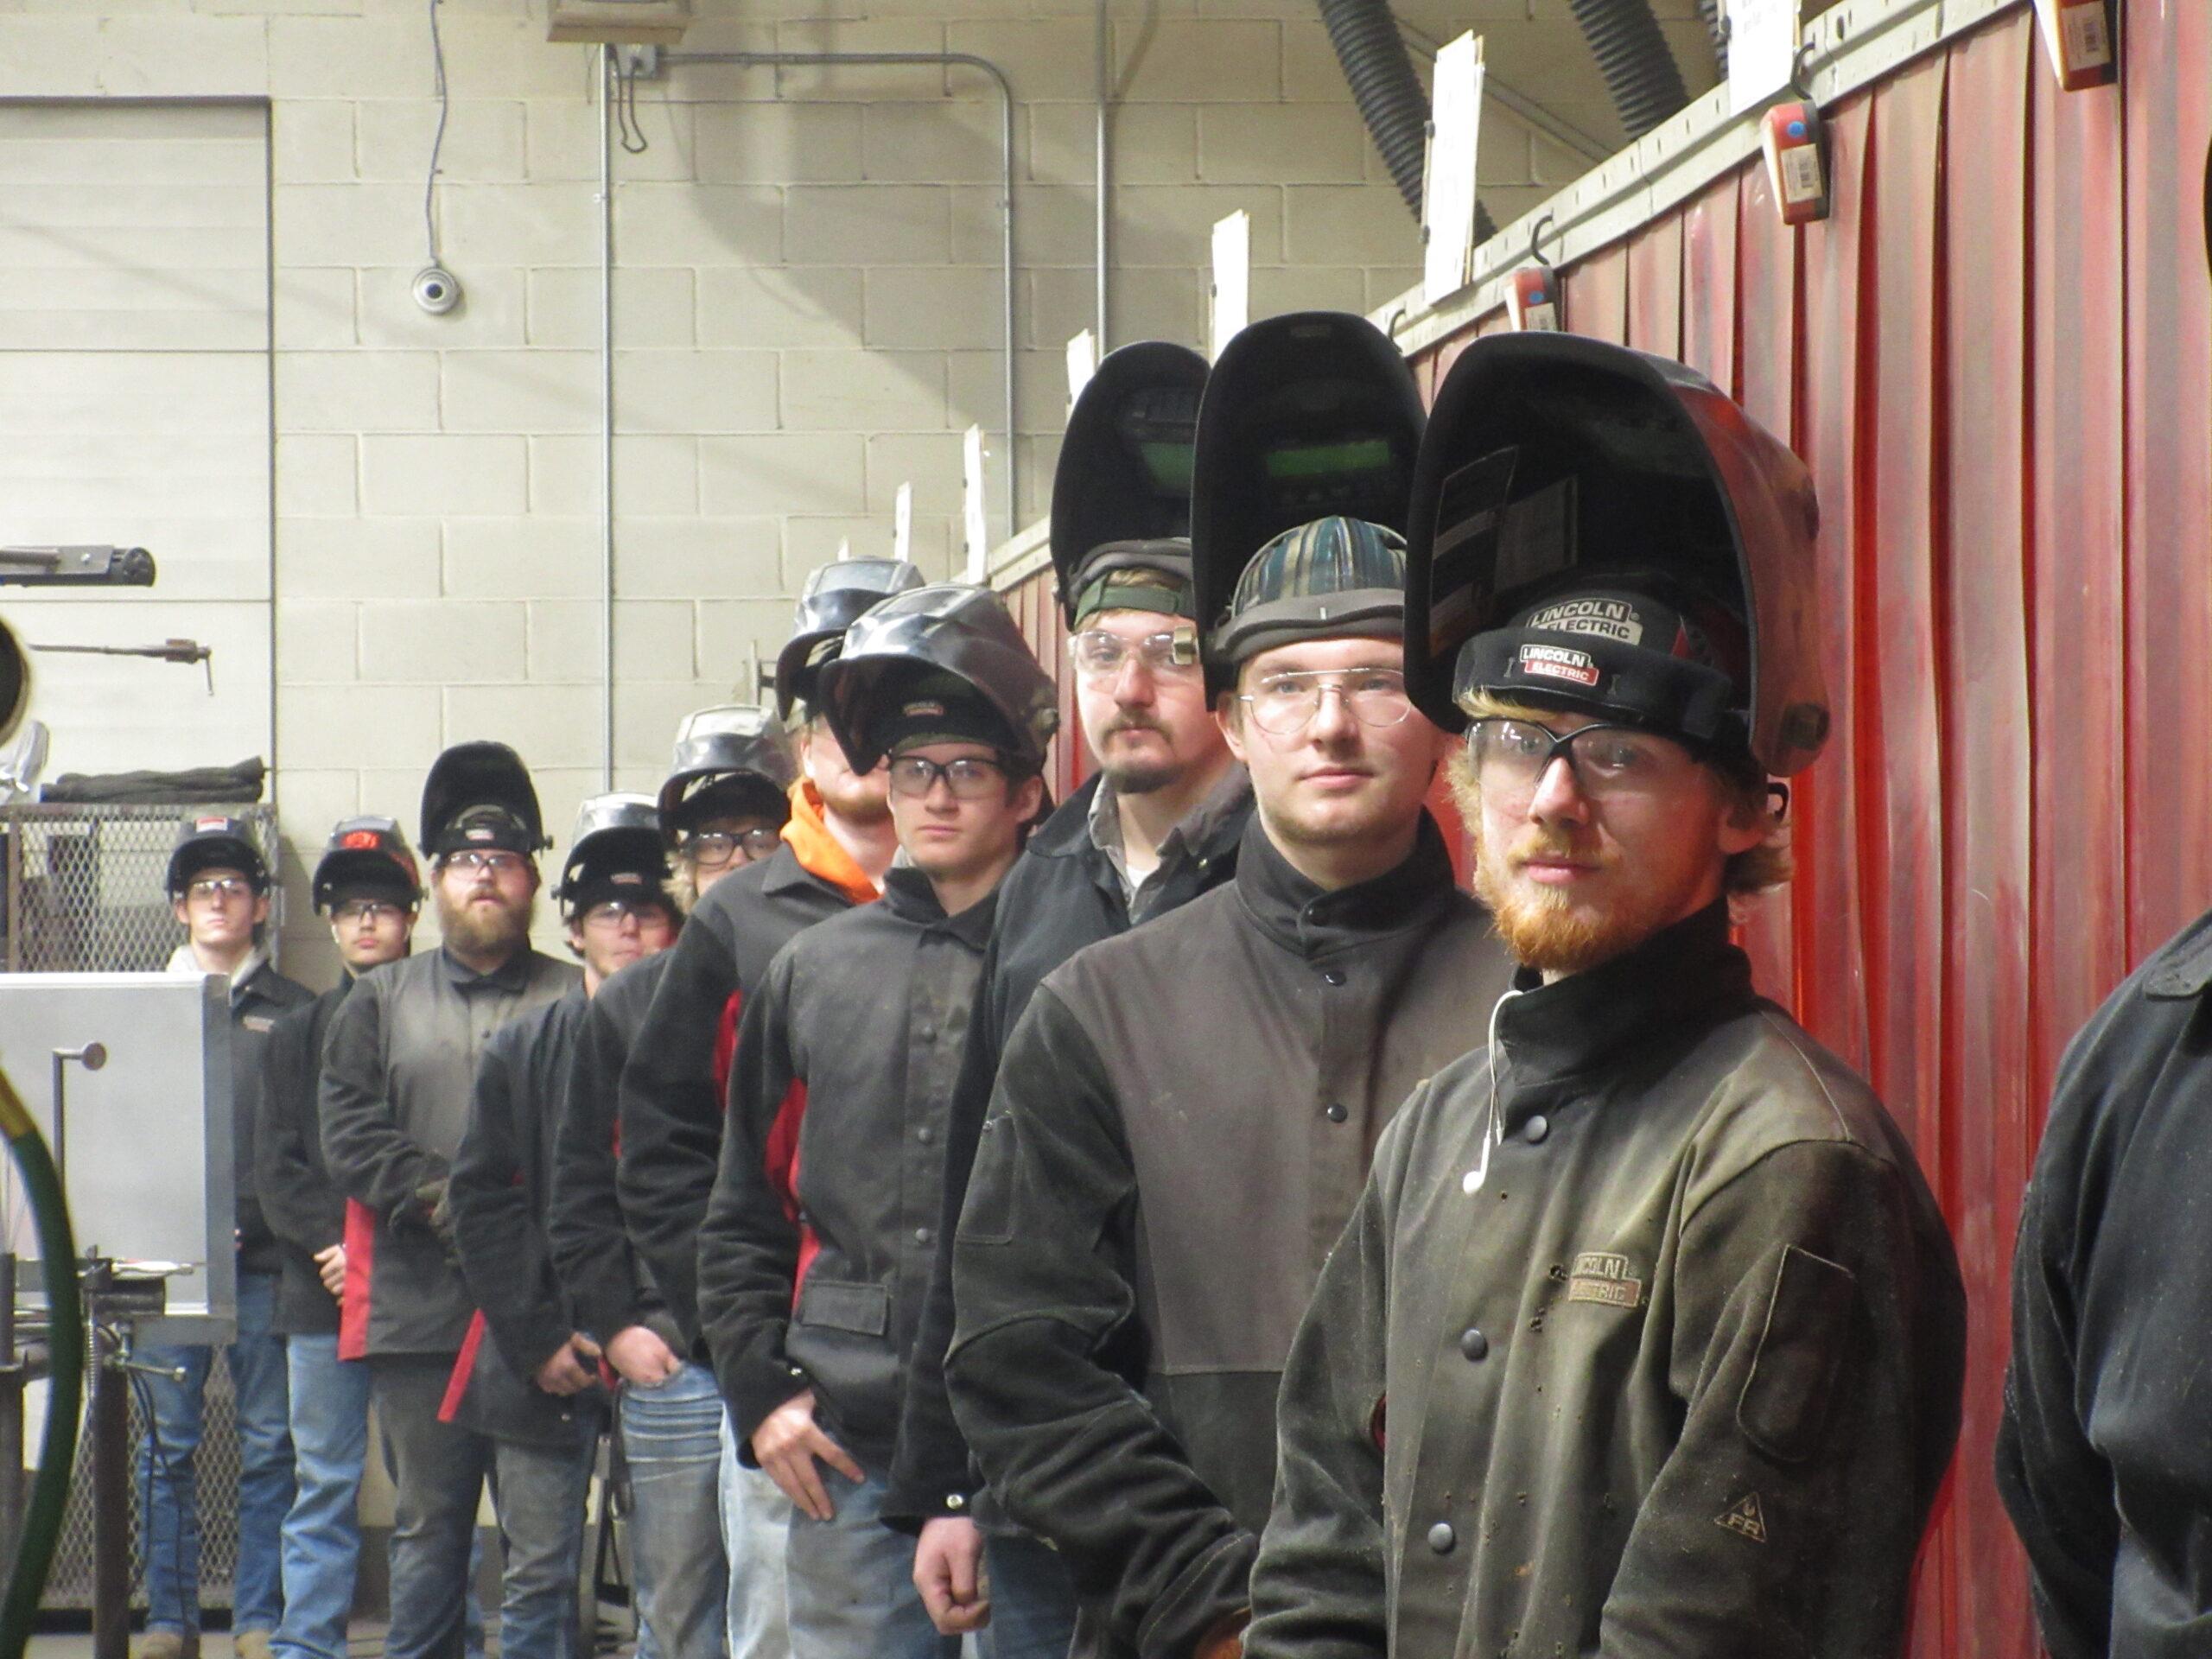 A-Line-of-Welding-Students-Posing-For-The-Camera